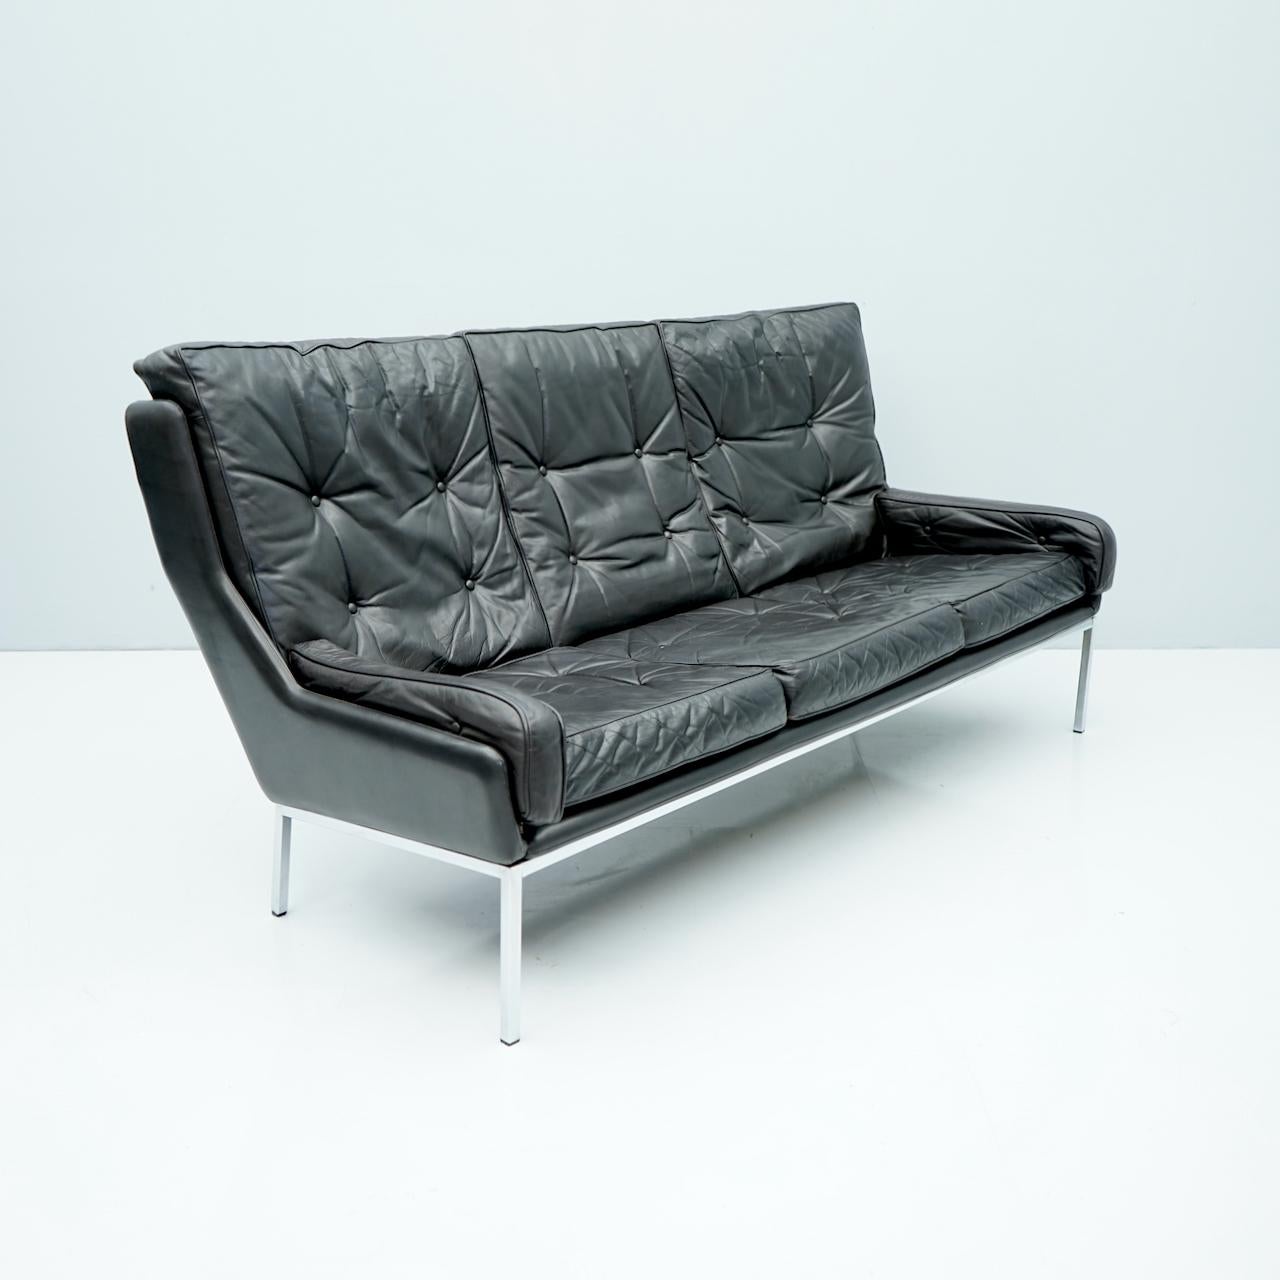 Rare Three-Seat Sofa by Roland Rainer in Black Leather, 1960s For Sale 1